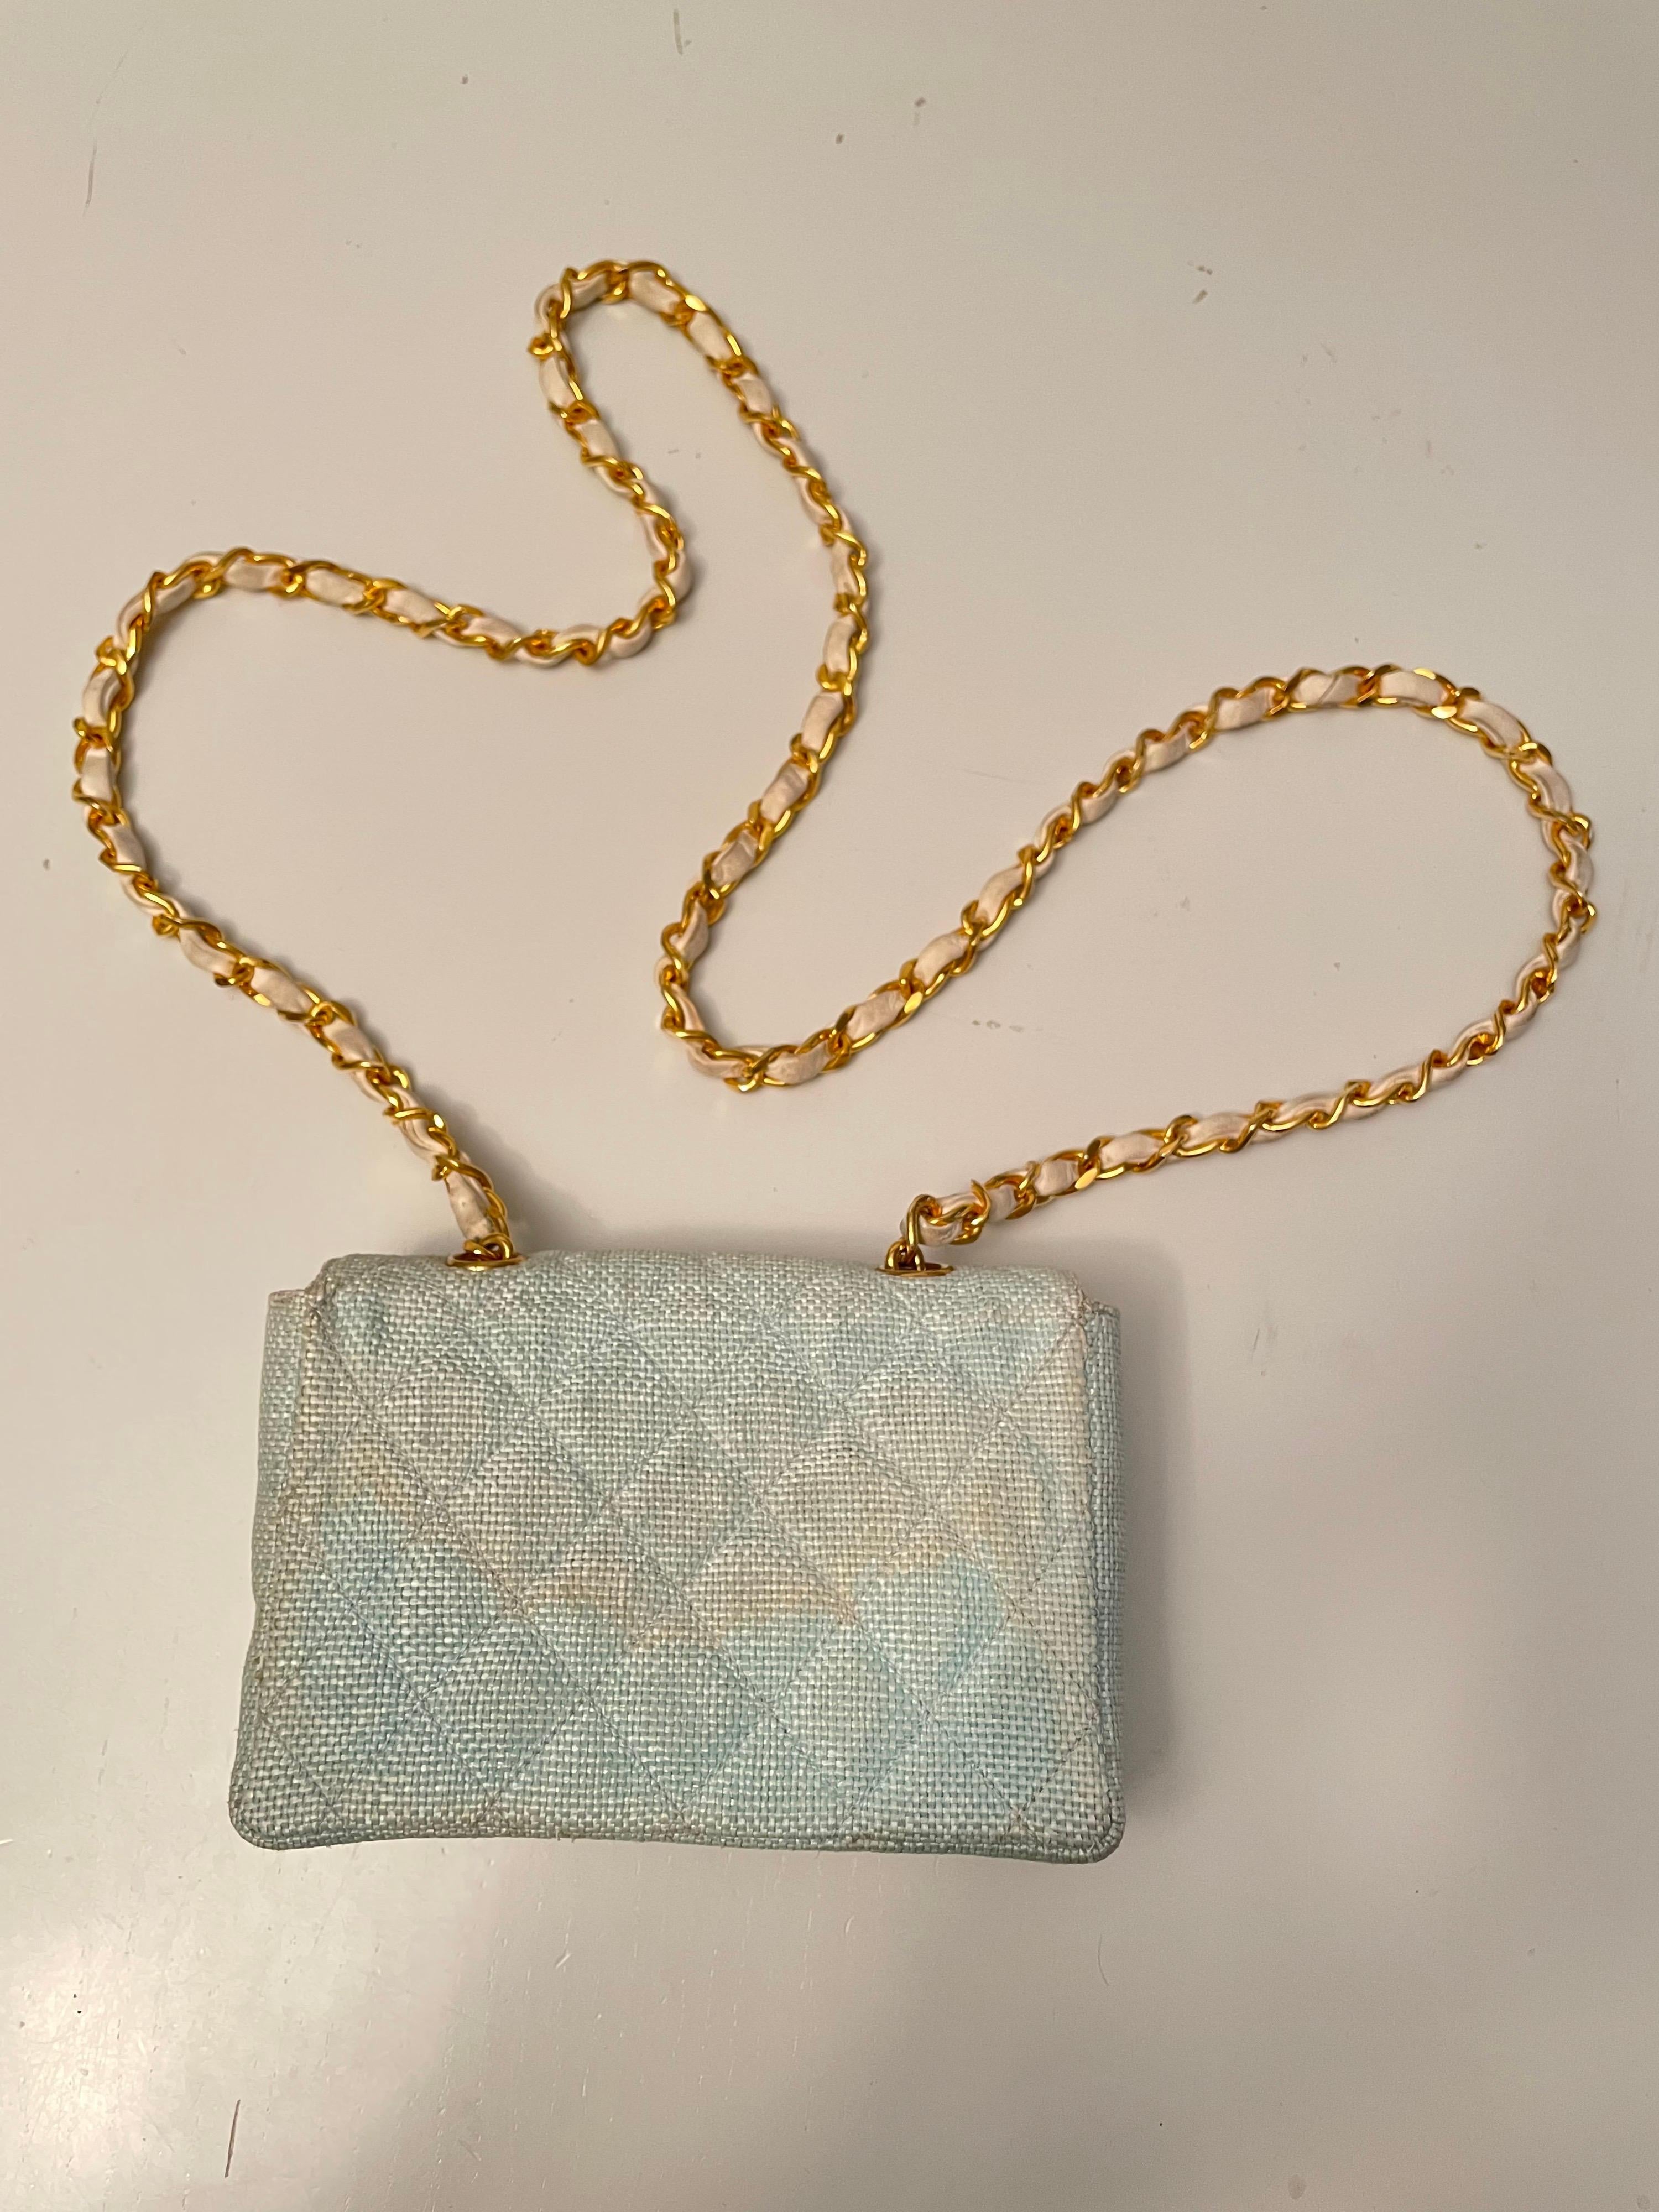 Women's or Men's Chanel 70s light blue canvas small Bag